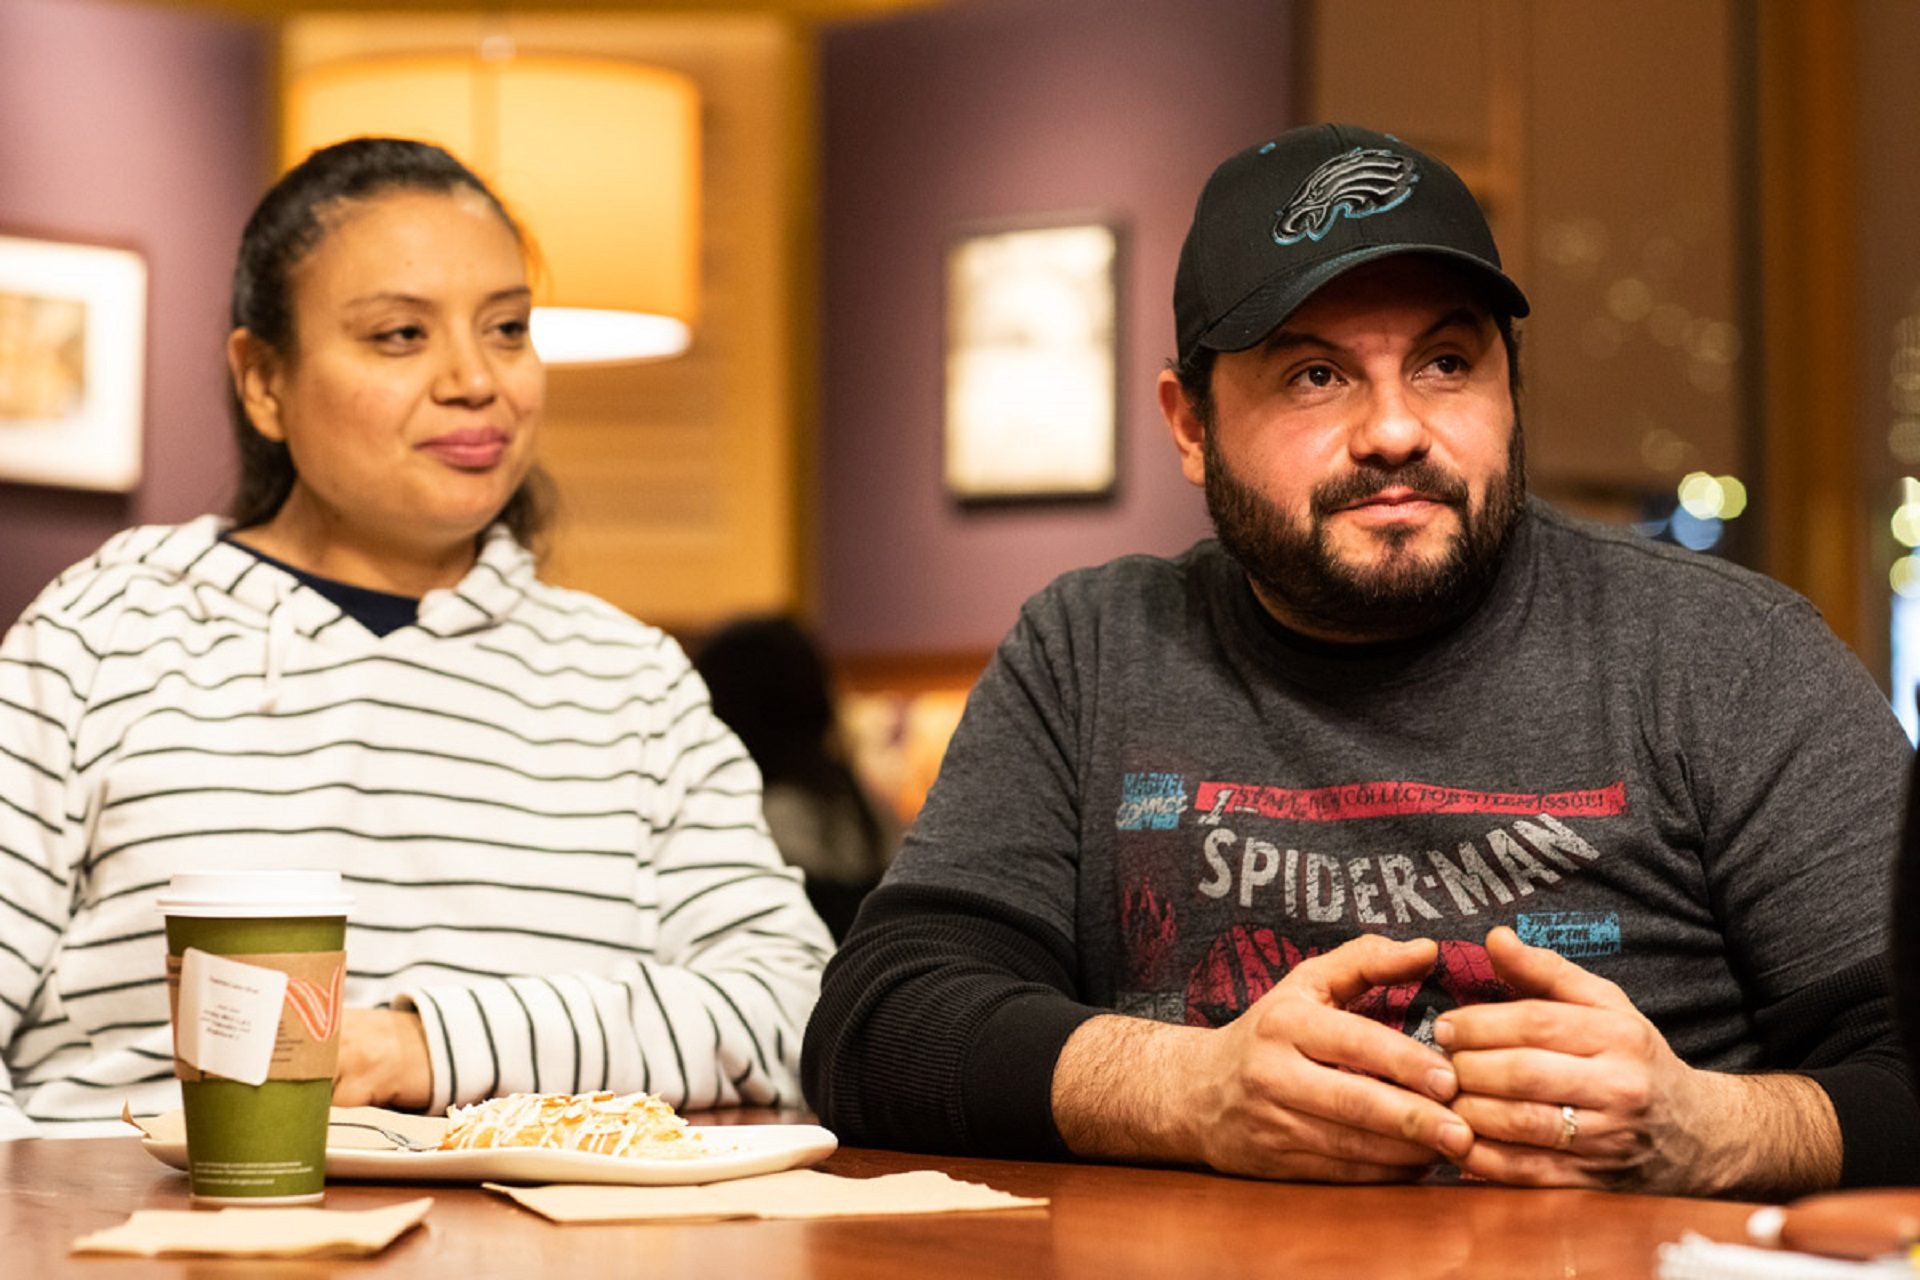 Rodrigo Ortiz and Isa del Rosario, husband and wife, are members of the Movement of Immigrant Leaders in Pennsylvania (MILPA), a grassroots organization working on issues affecting immigrants statewide.